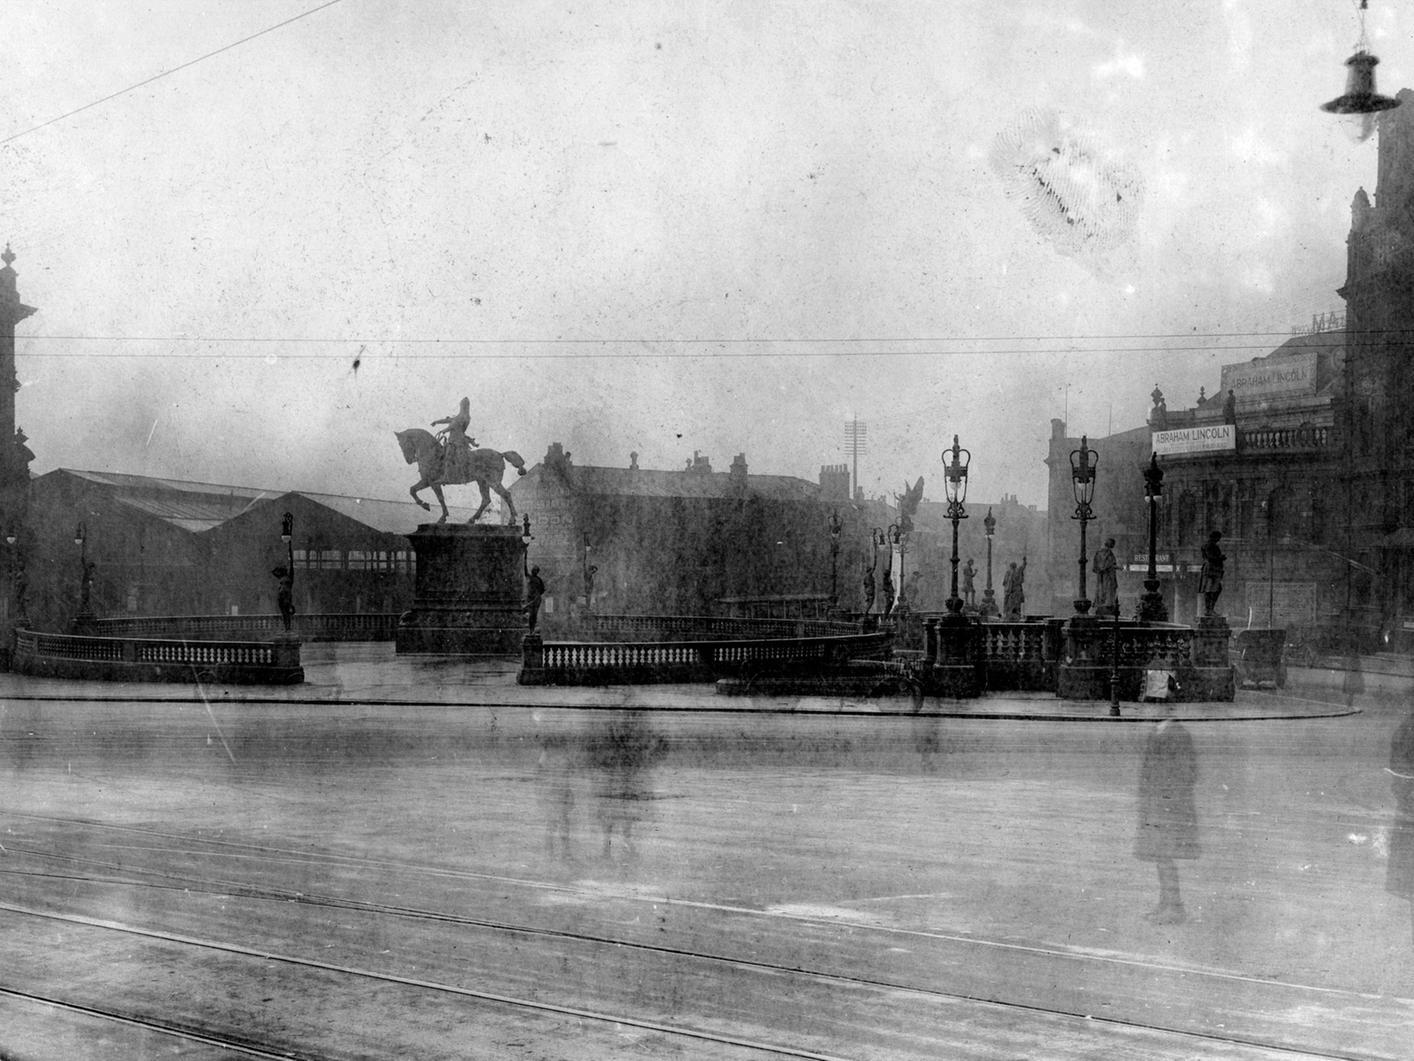 A view across City Square, showing from left to right. Old Queen's Hotel, Railway Station, Wellington Street, Majestic and Post Office.